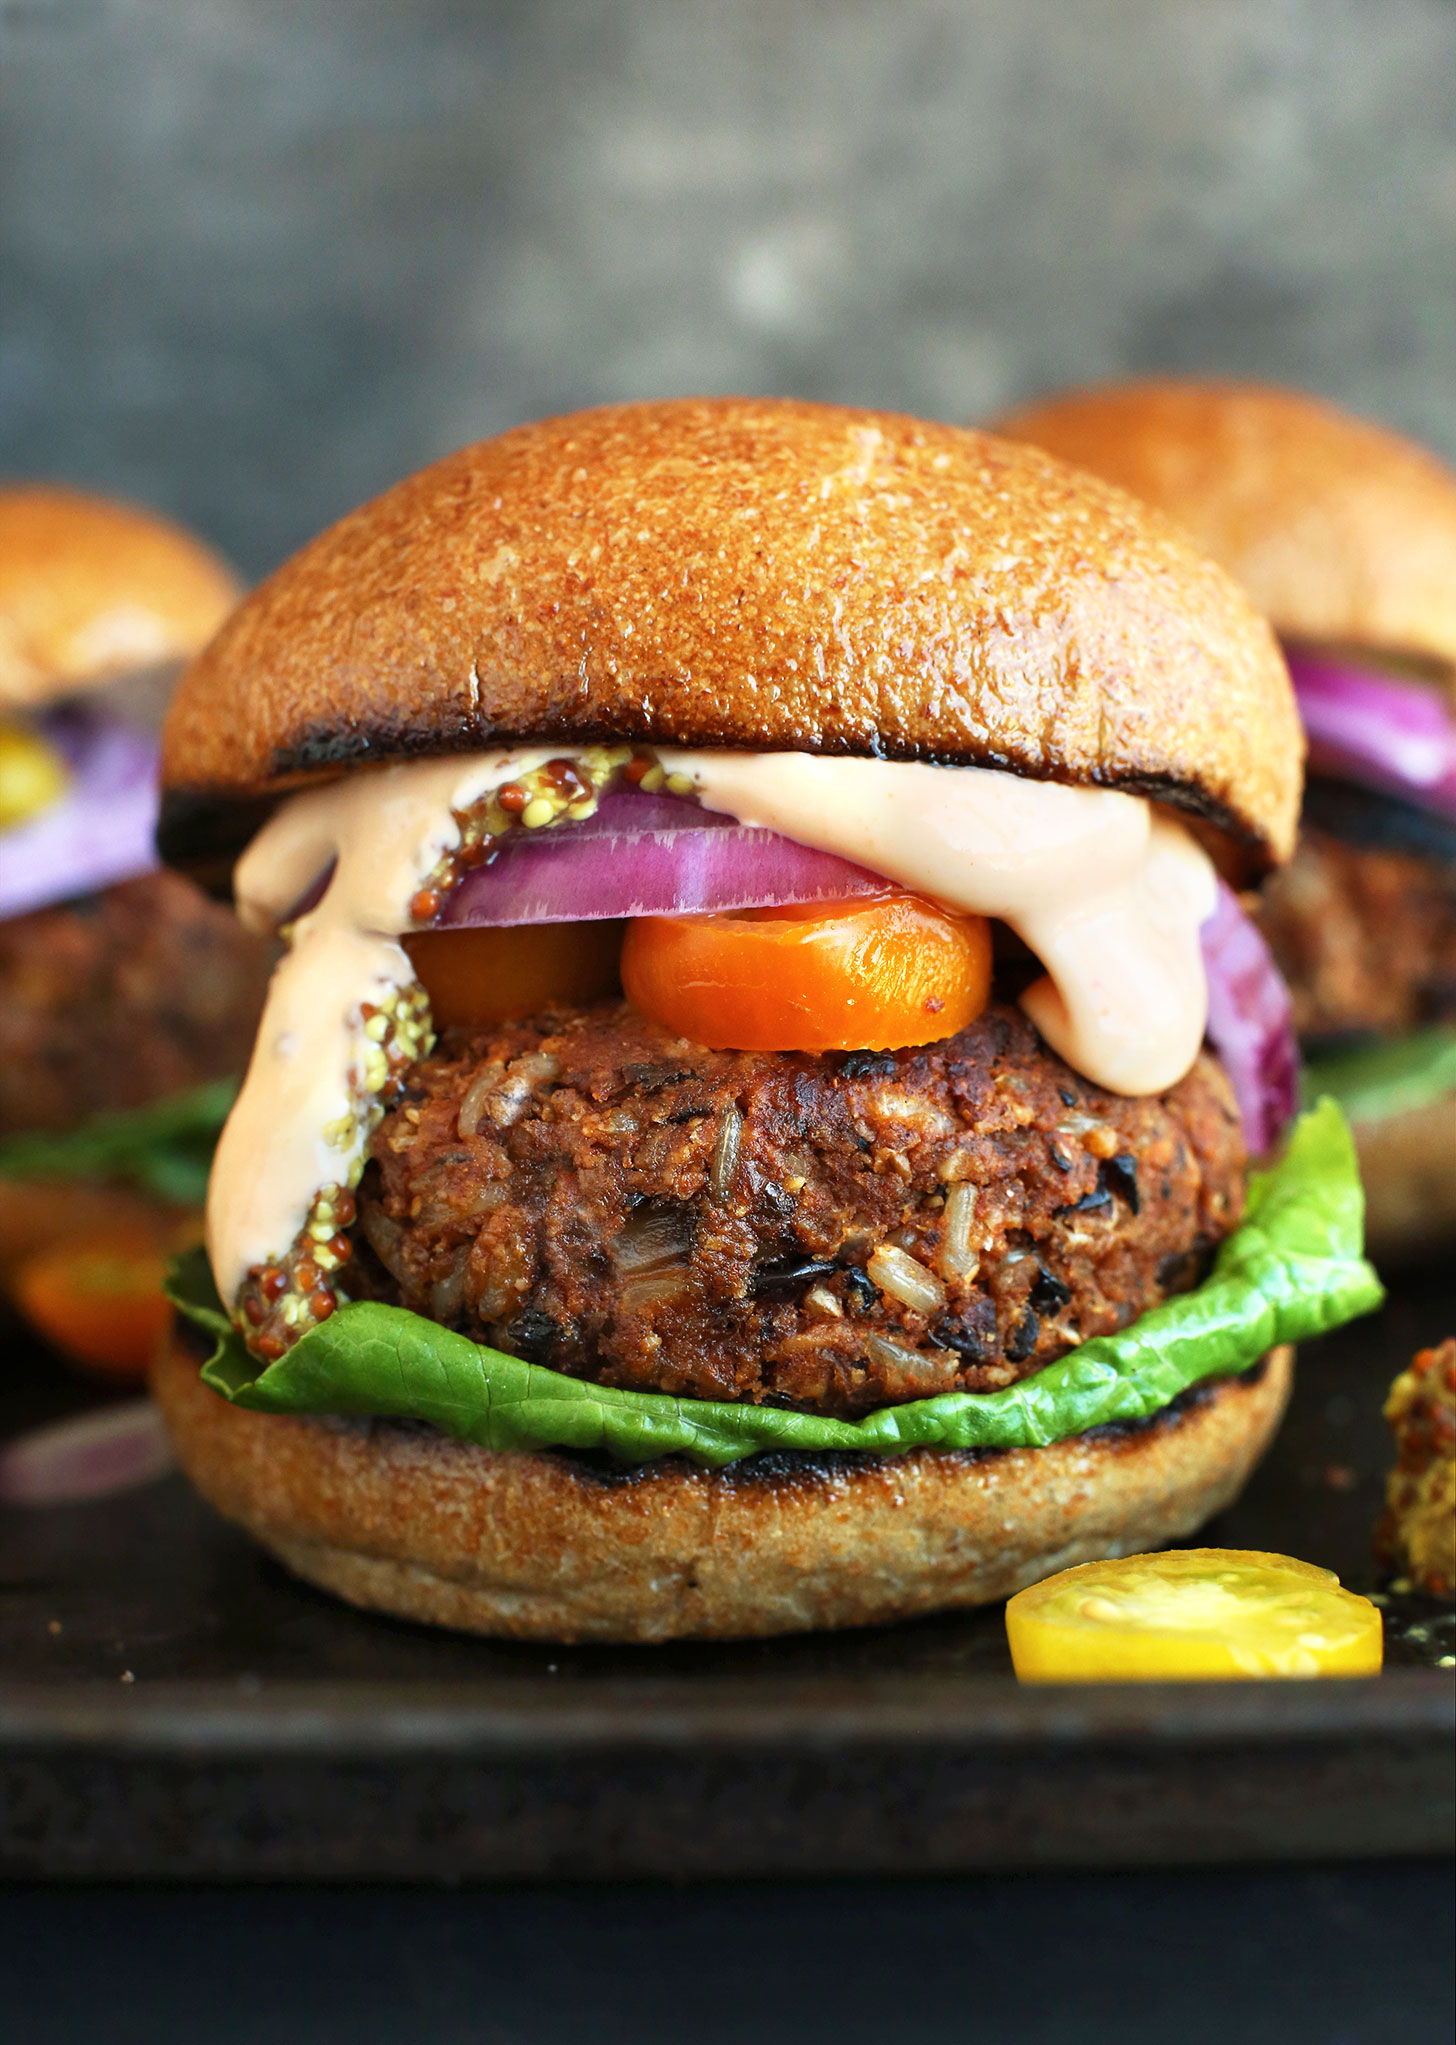 AMAZING-GRILLABLE-Veggie-Burgers-Hearty-flavorful-and-hold-up-on-the-grill-or-skillet-vegan-veggieburger-grilling-dinner-healthy-recipe